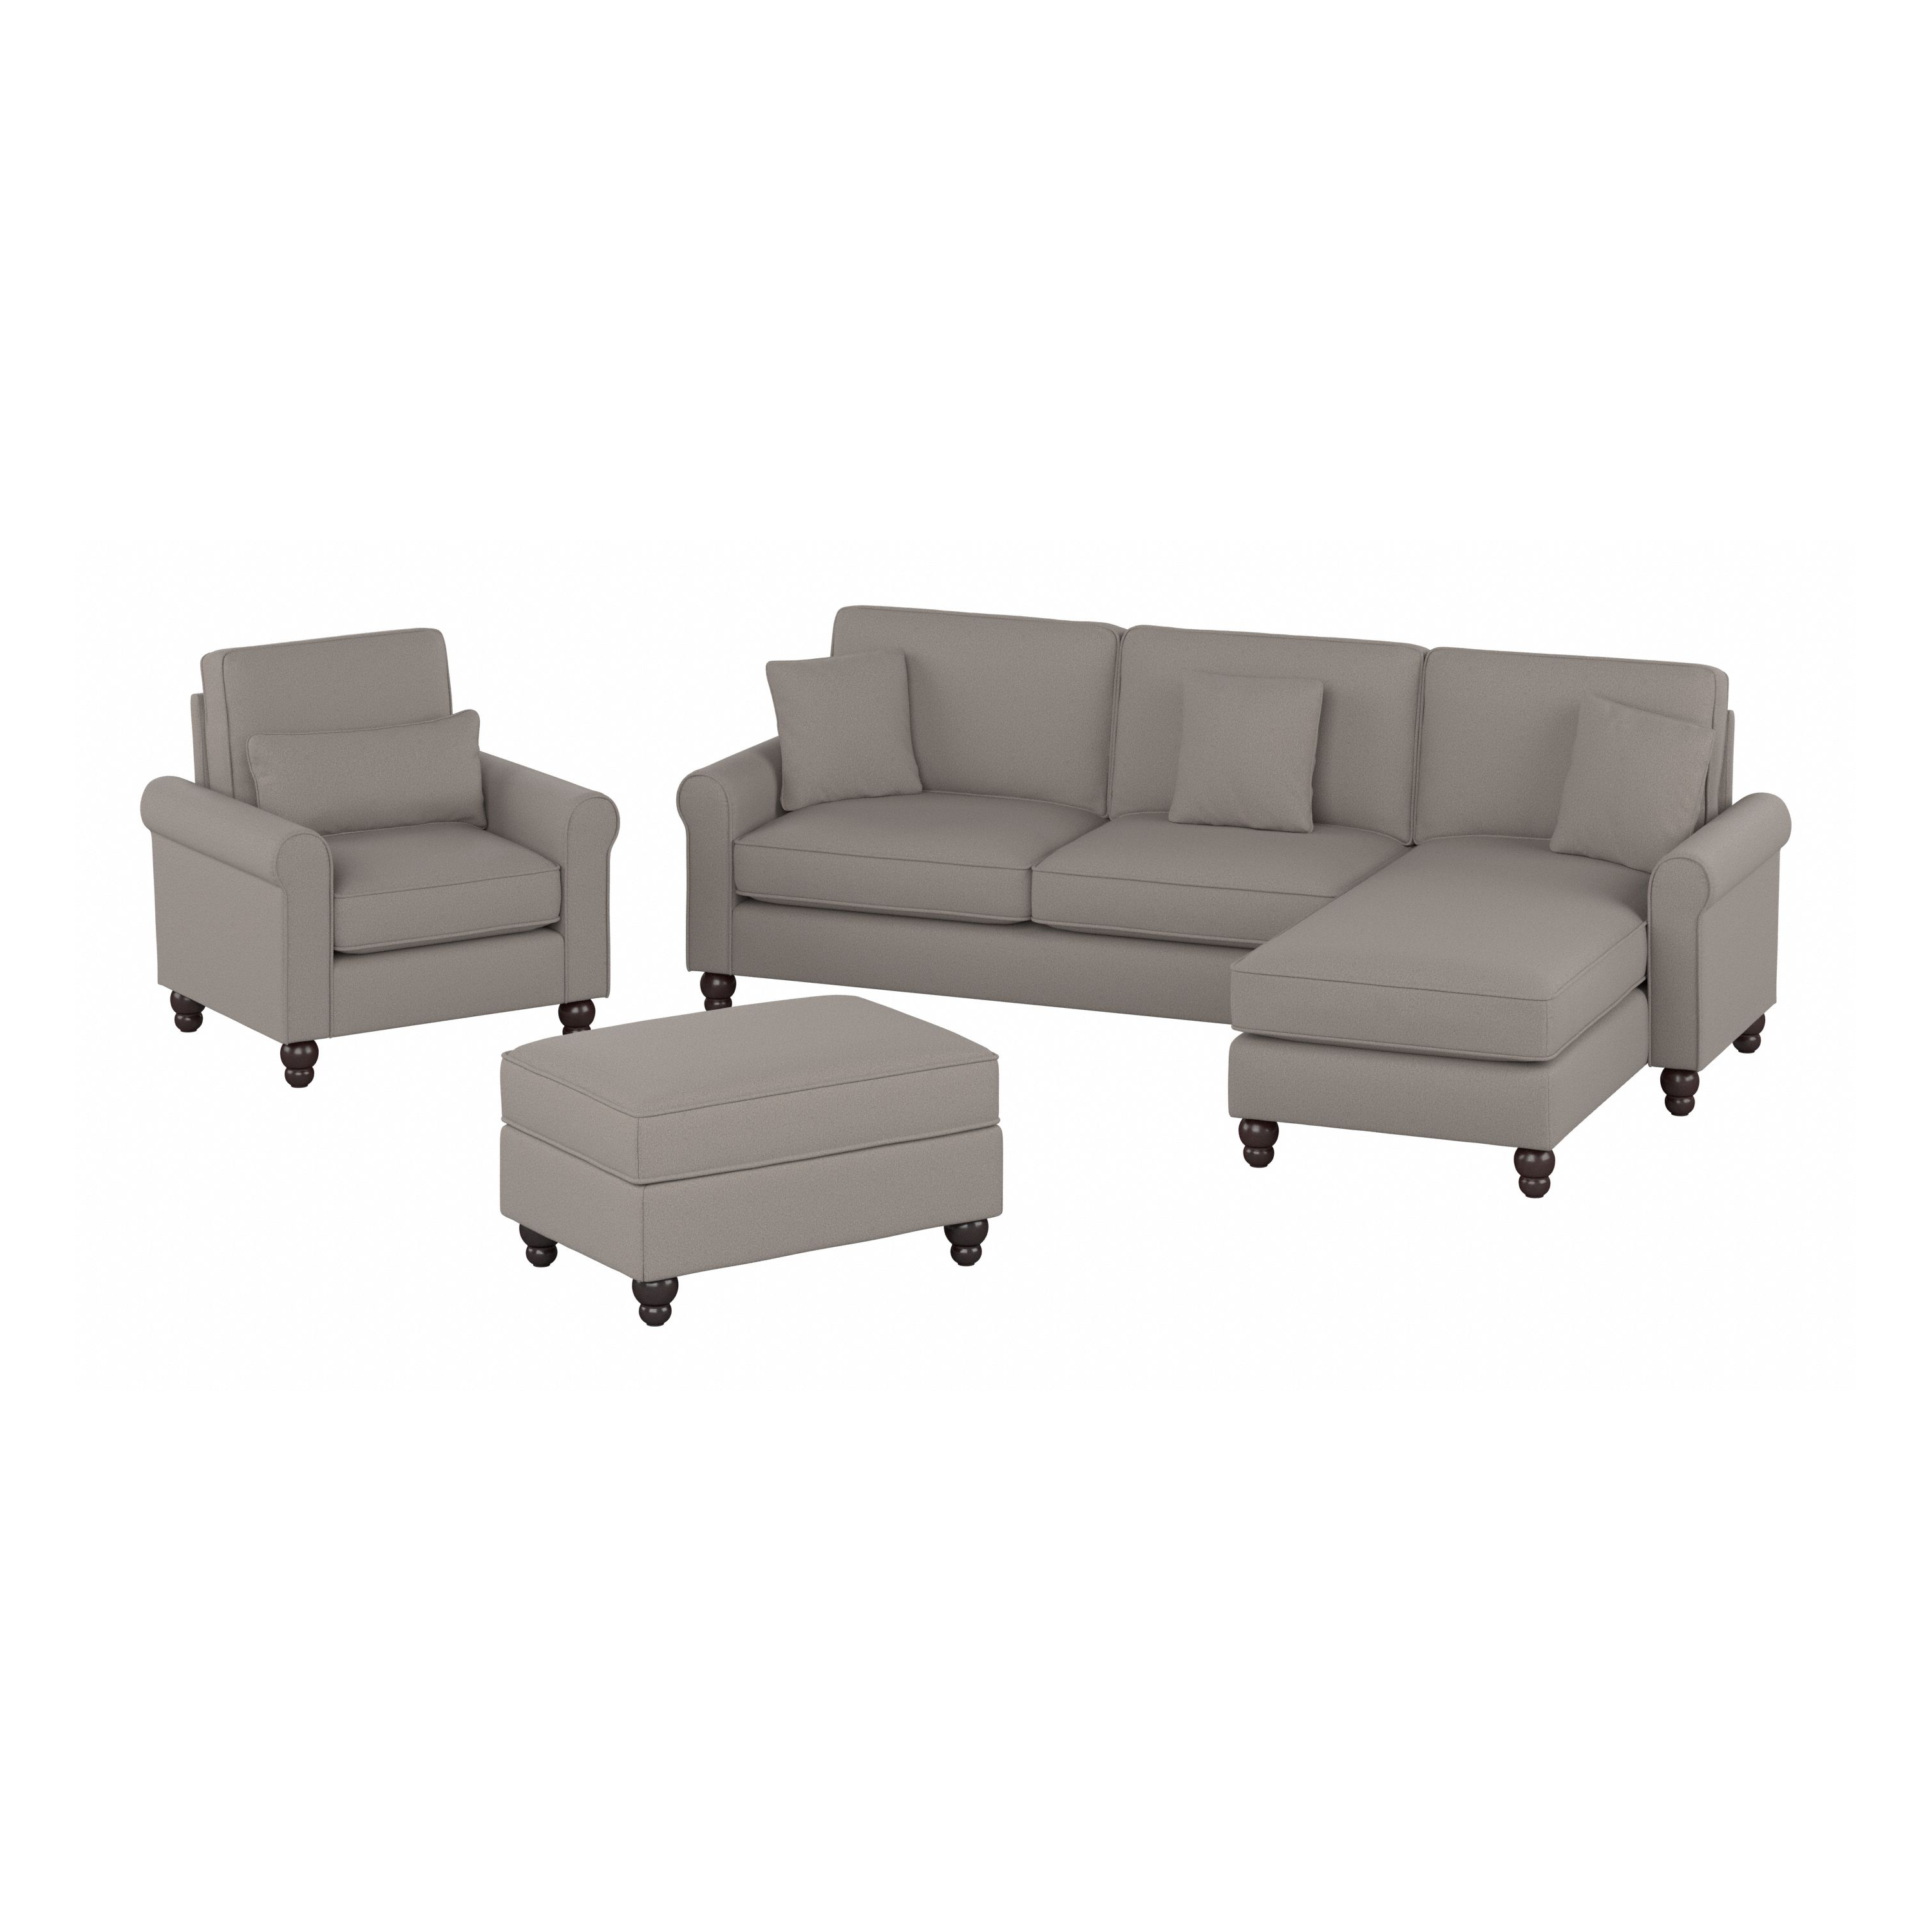 Shop Bush Furniture Hudson 102W Sectional Couch with Reversible Chaise Lounge, Accent Chair, and Ottoman 02 HDN021BGH #color_beige herringbone fabric